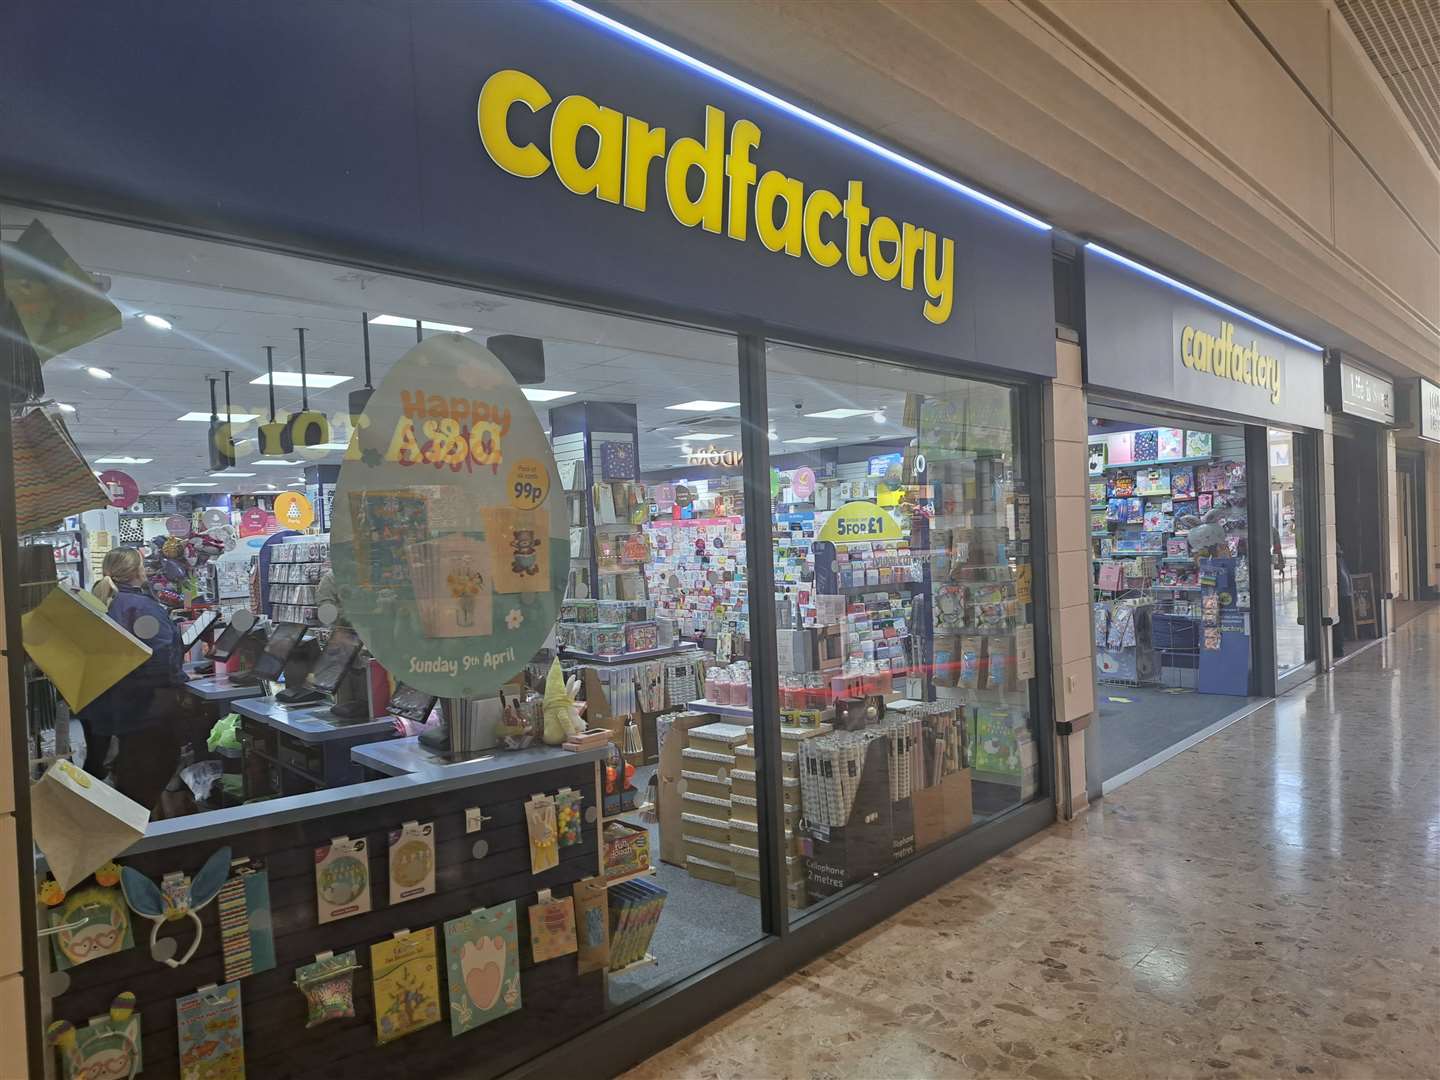 The Card Factory shop in Chatham's Pentagon centre is still open